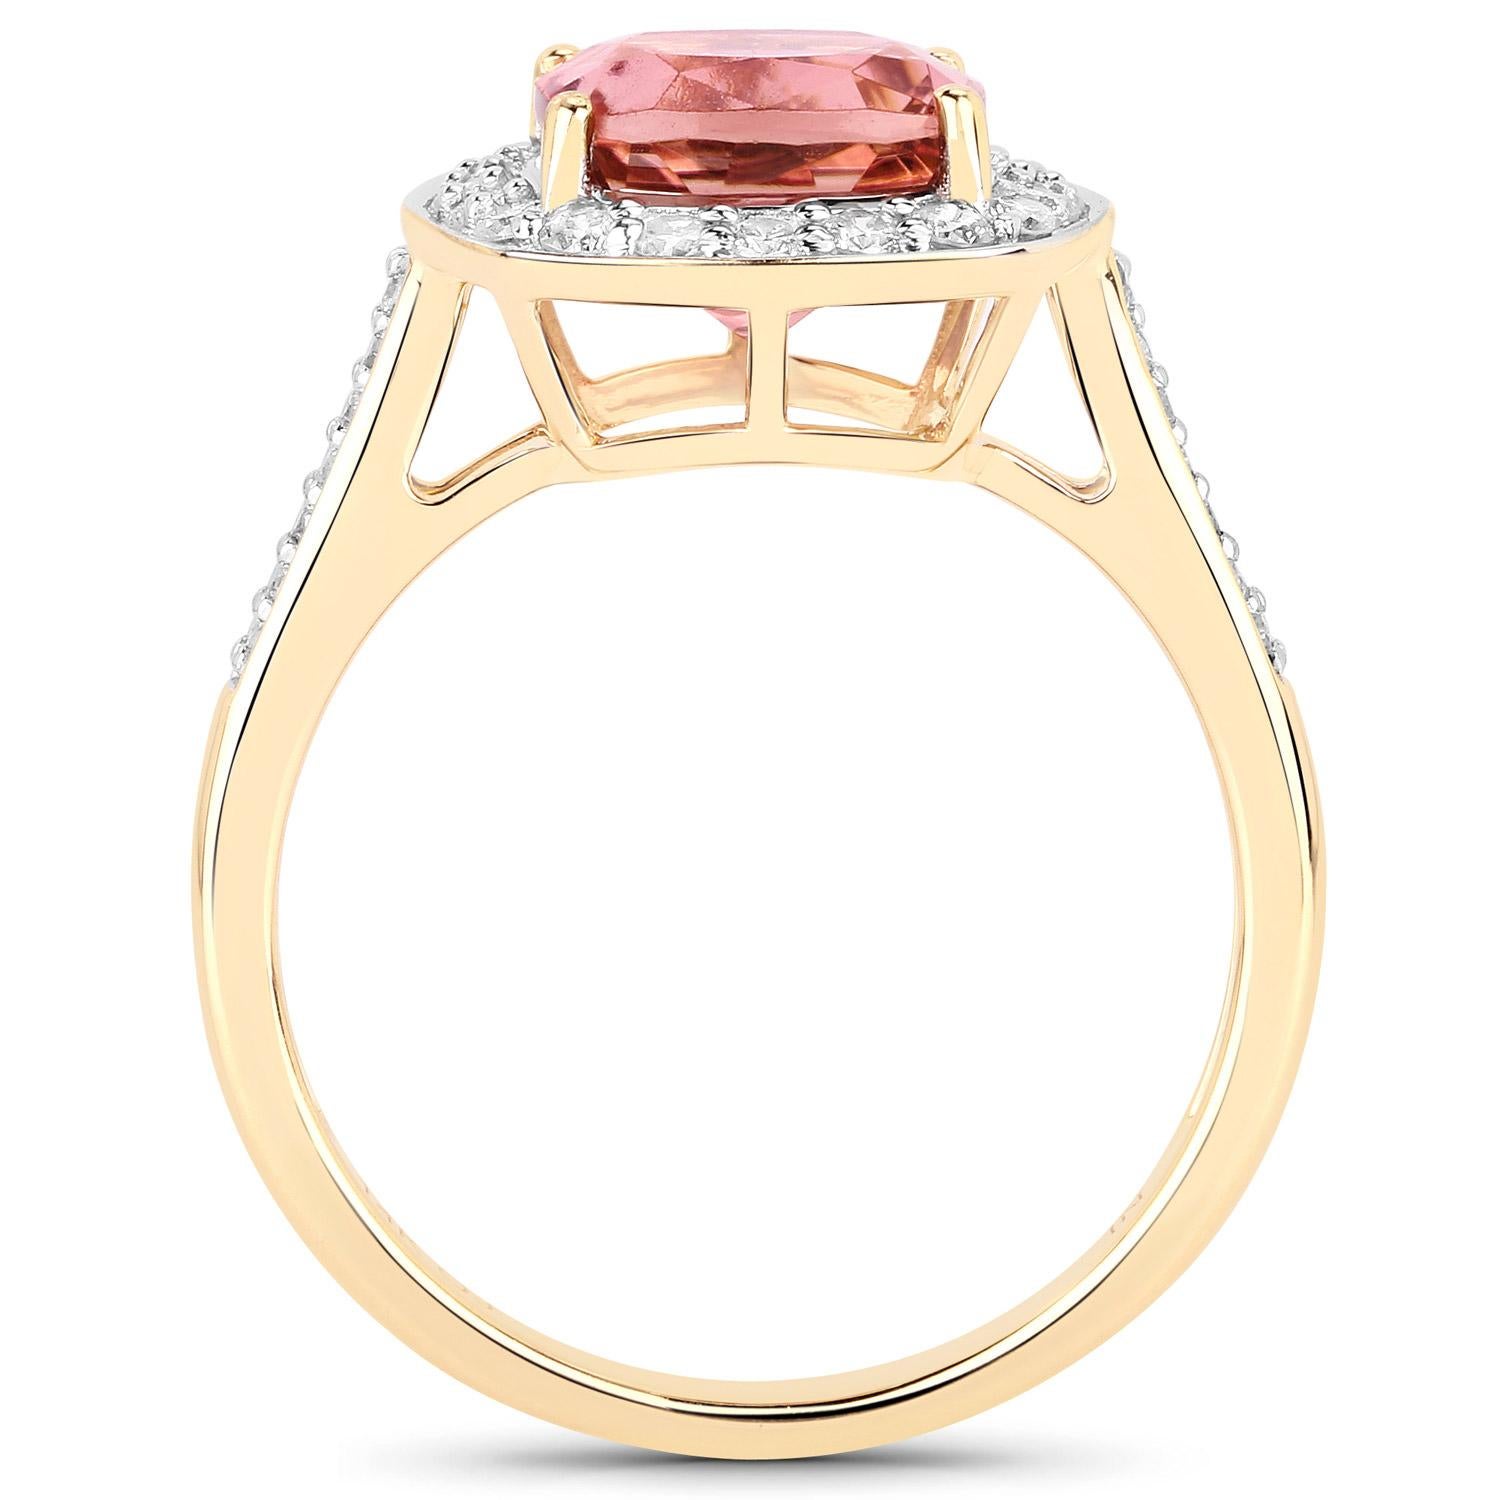 Natural Pink Tourmaline Ring Diamond Halo 2.70 Carats 14K Yellow Gold In Excellent Condition For Sale In Laguna Niguel, CA